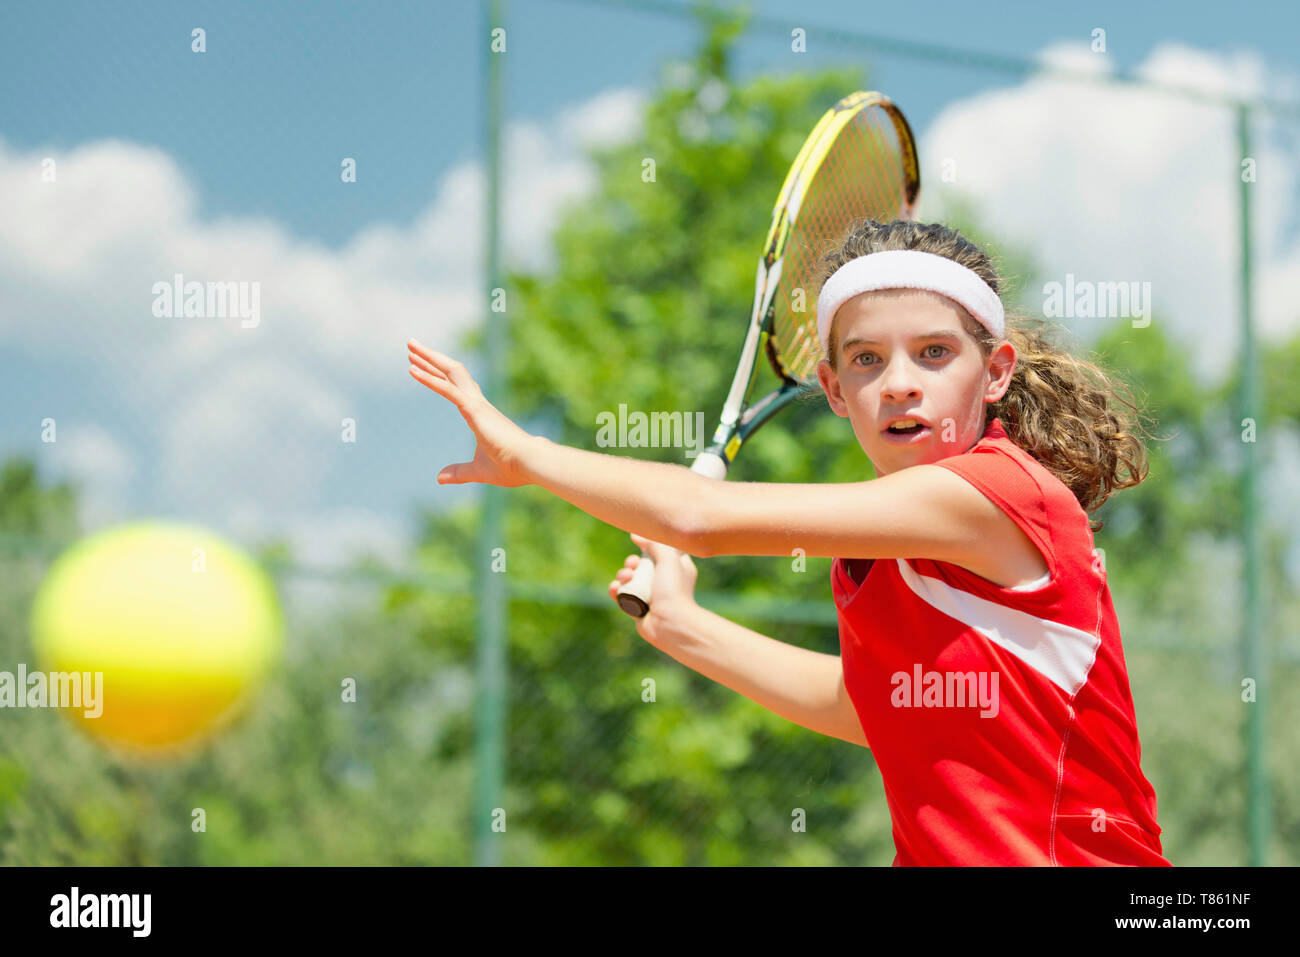 Girl playing tennis Banque D'Images